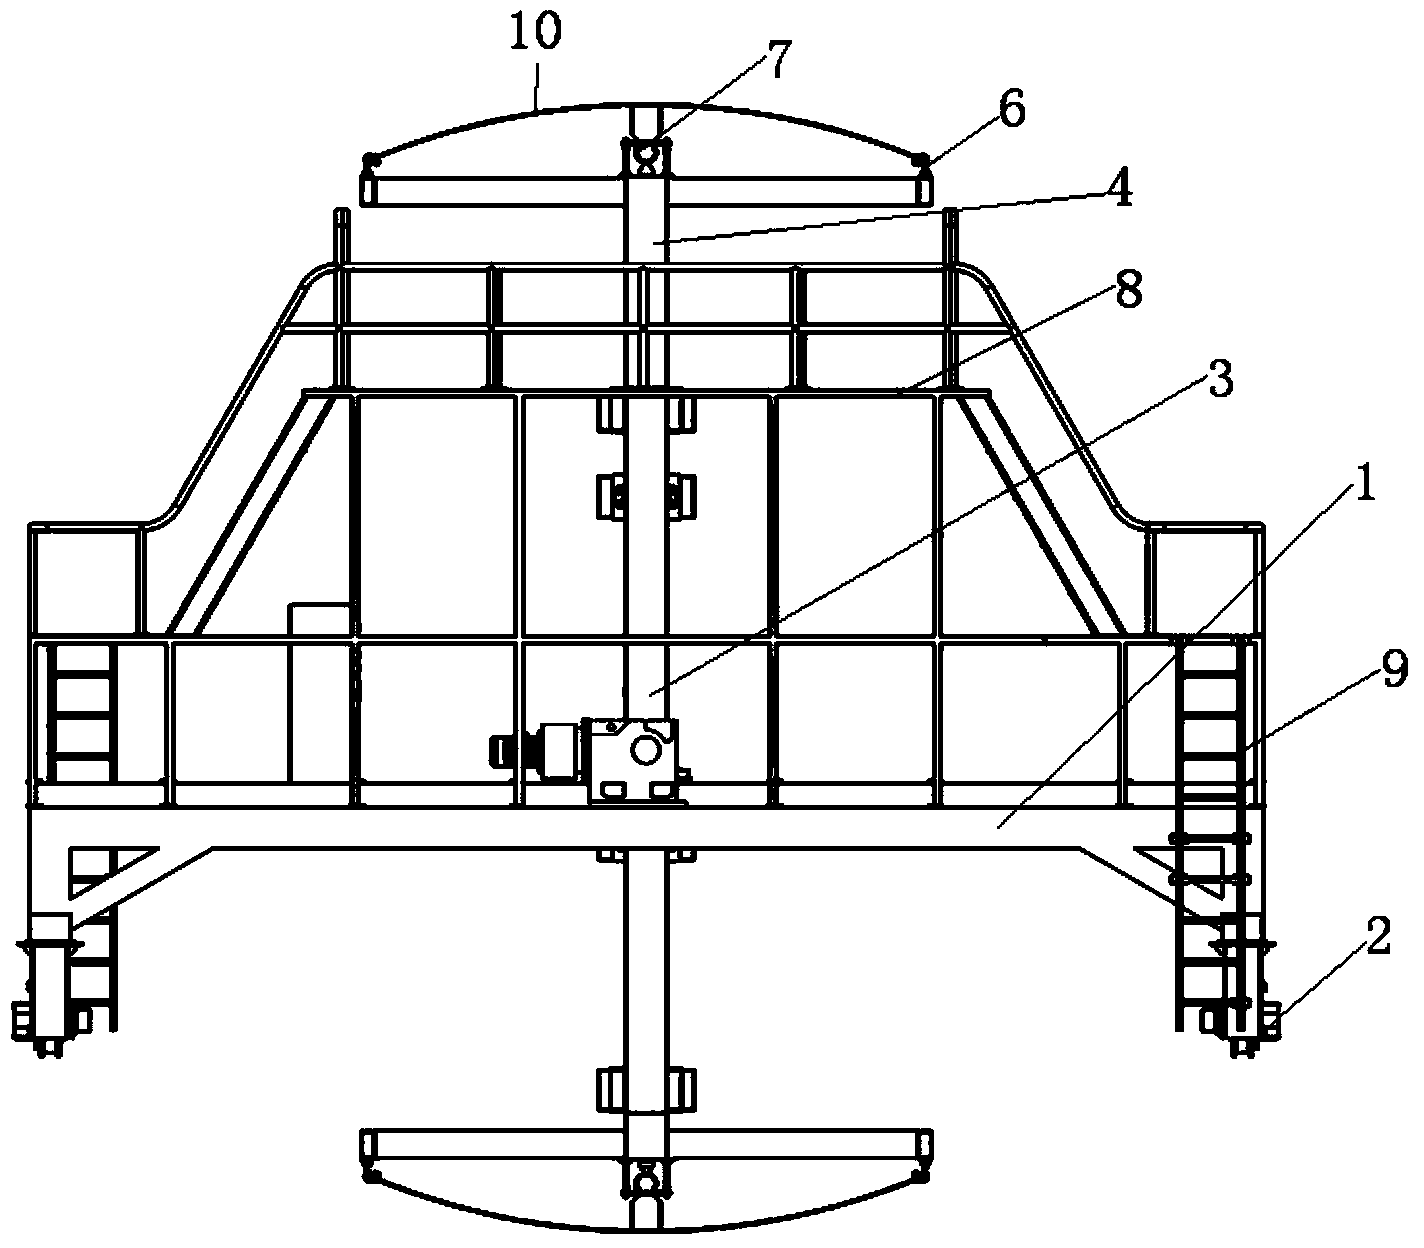 Metro circular-arc-shaped section reinforcing construction apparatus